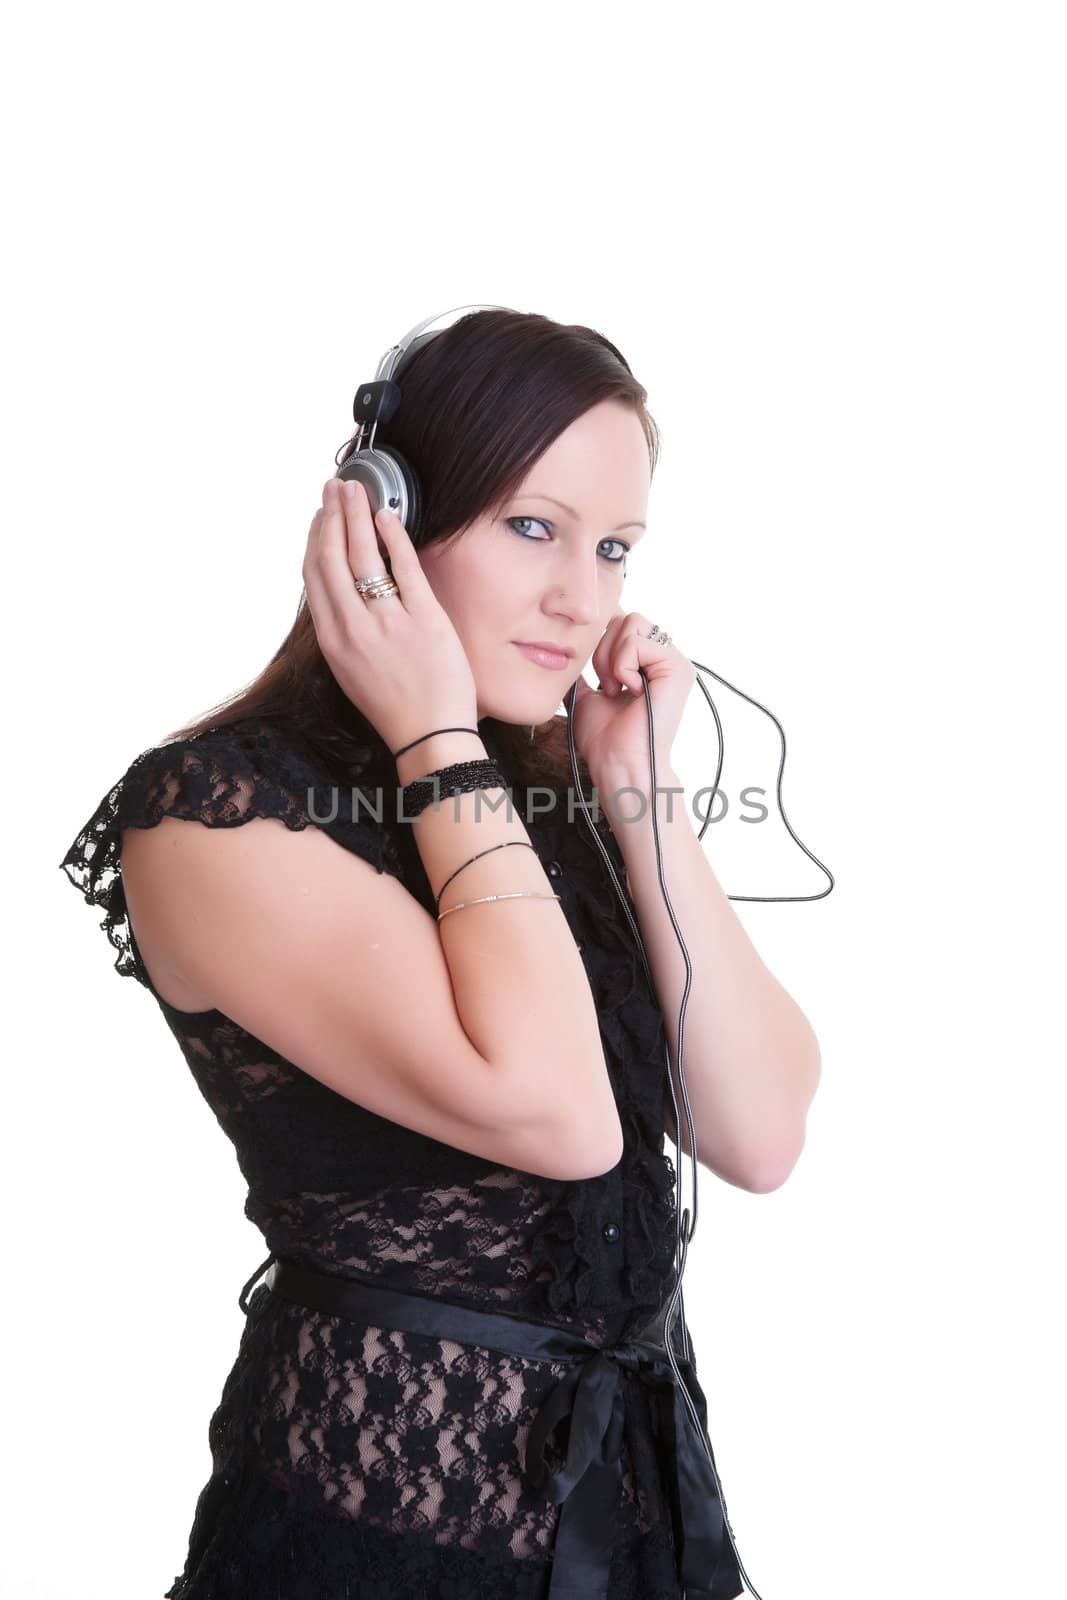 young woman listening headphones by clearviewstock